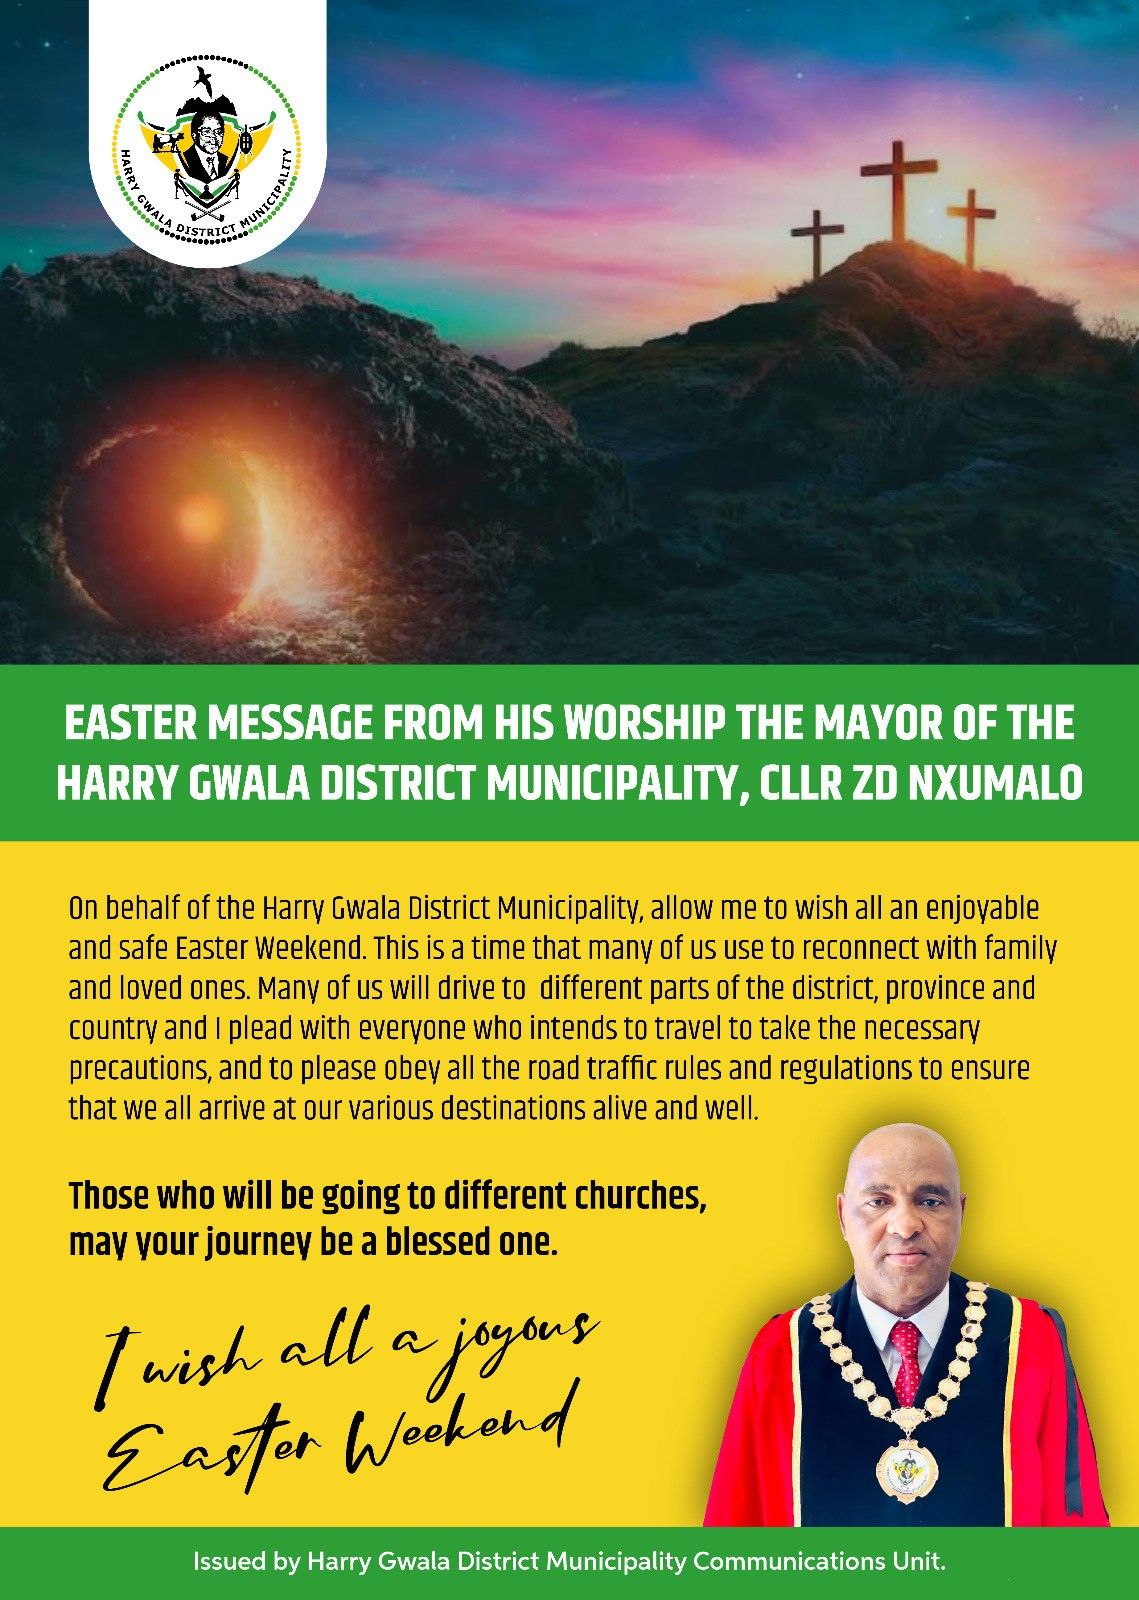 Easter Message From His Worship The Mayor of The Harry Gwala District Municipality, CLLR ZD Nxumalo